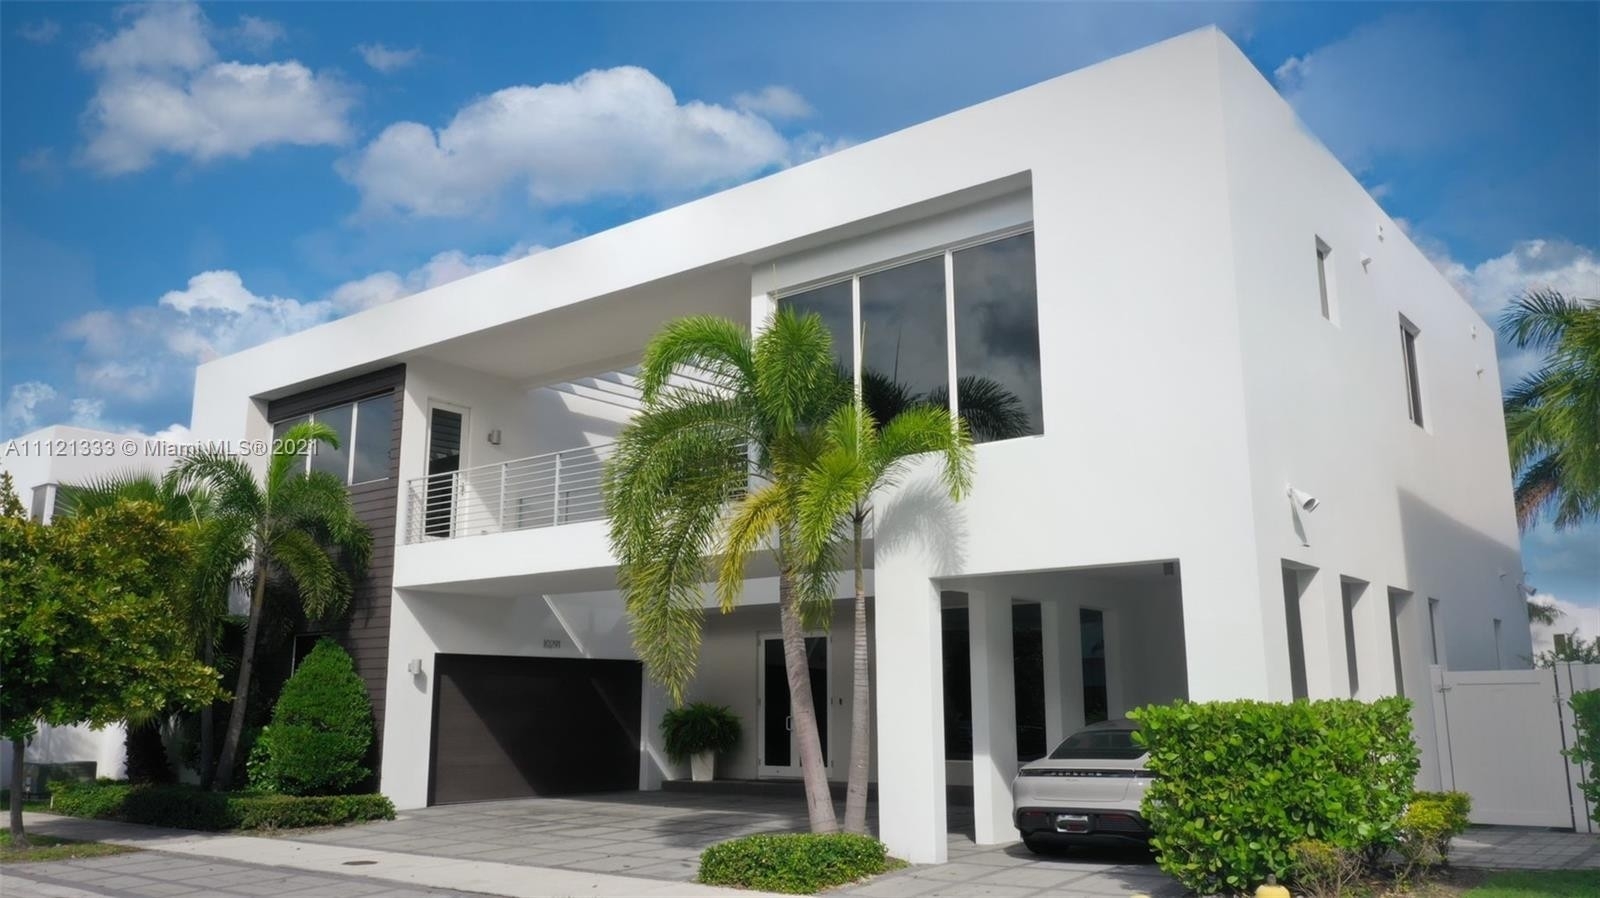 Single Family Home at Doral